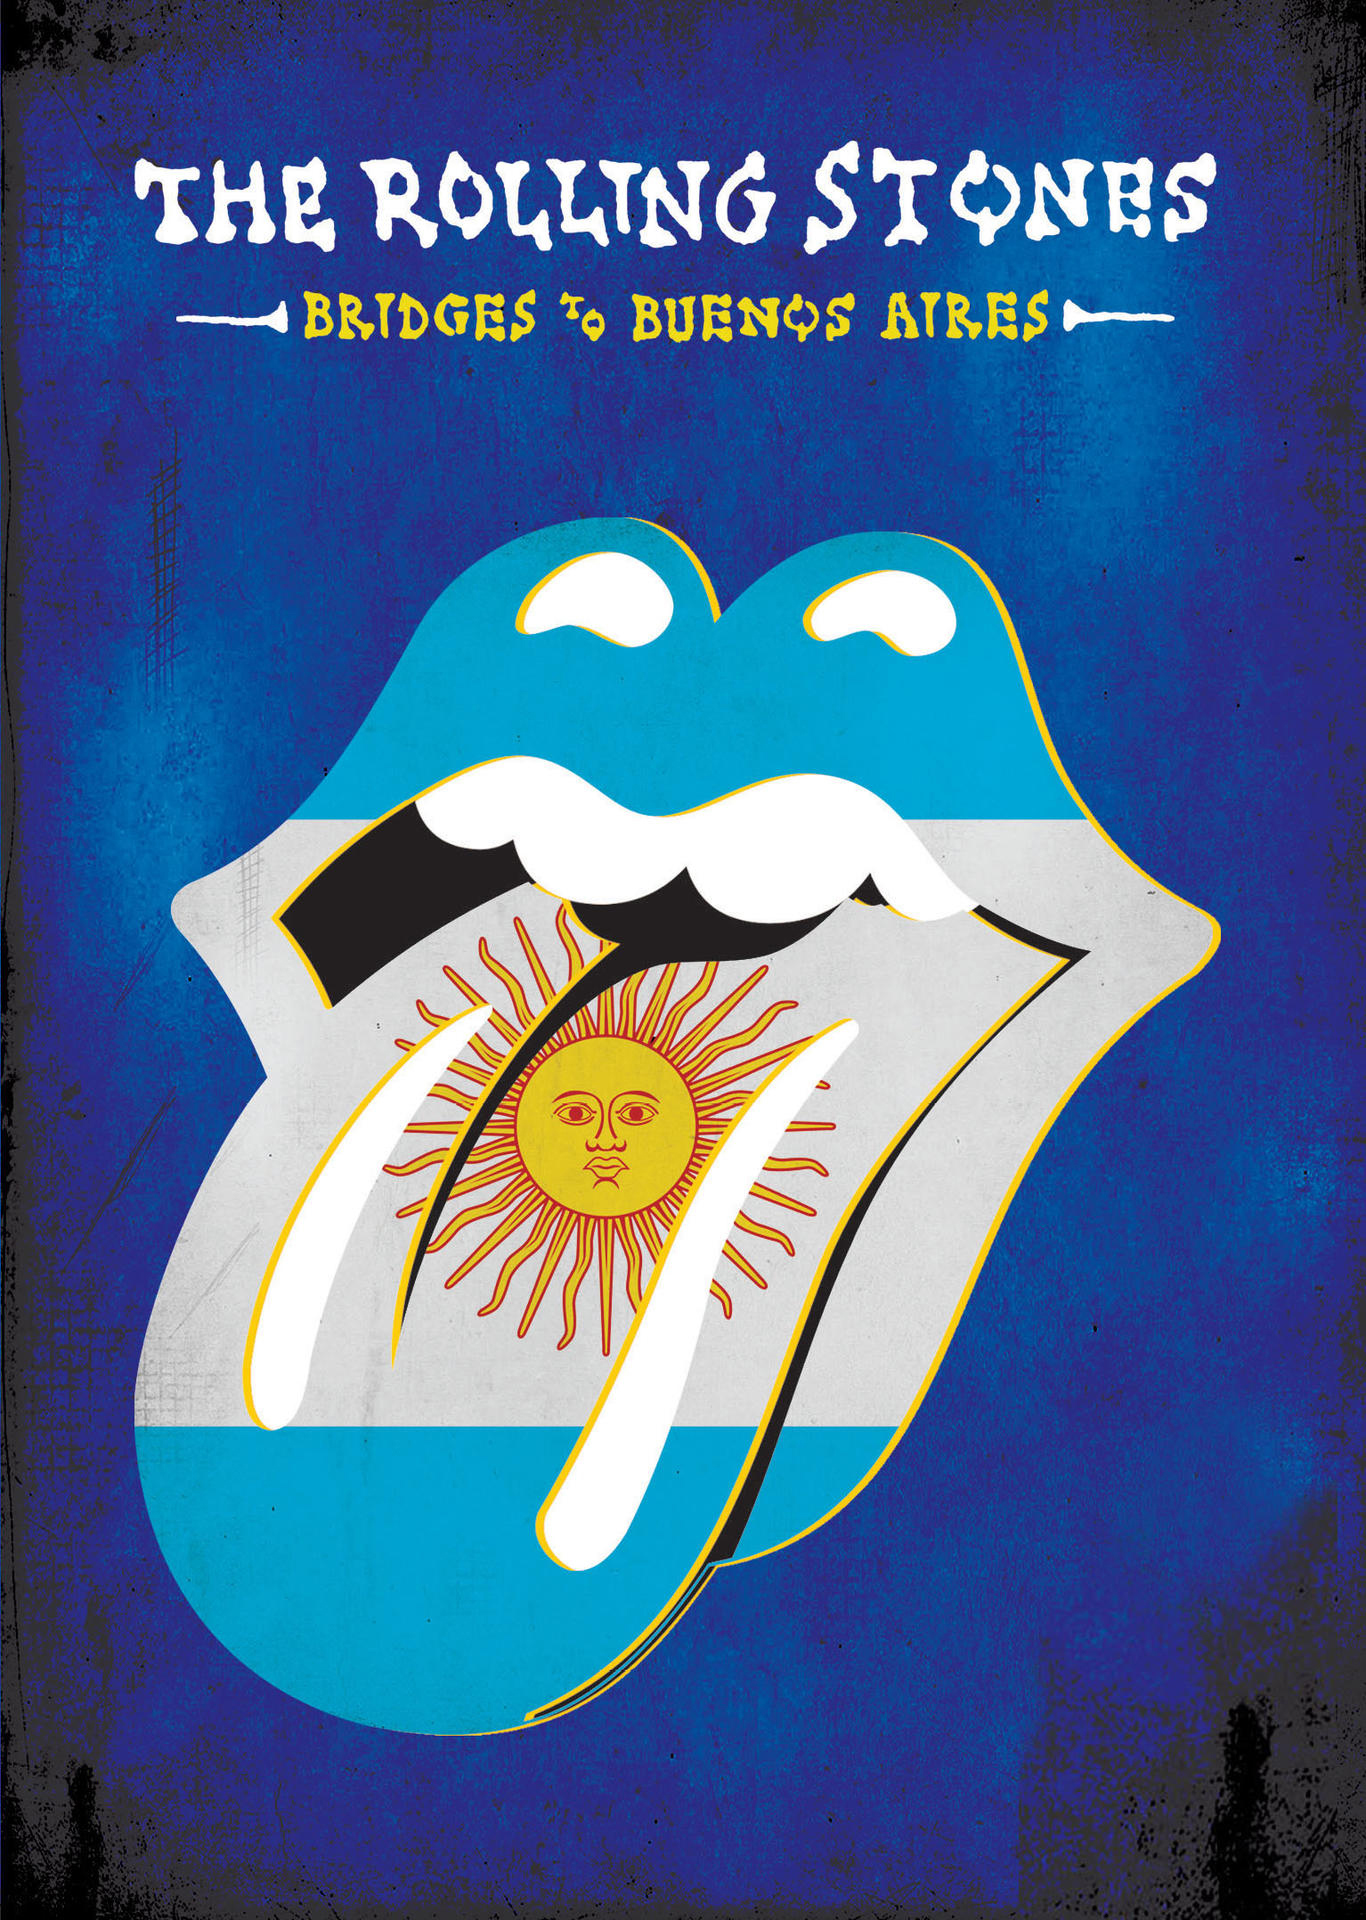 The Rolling Stones To Aires Bridges - - Buenos (DVD)